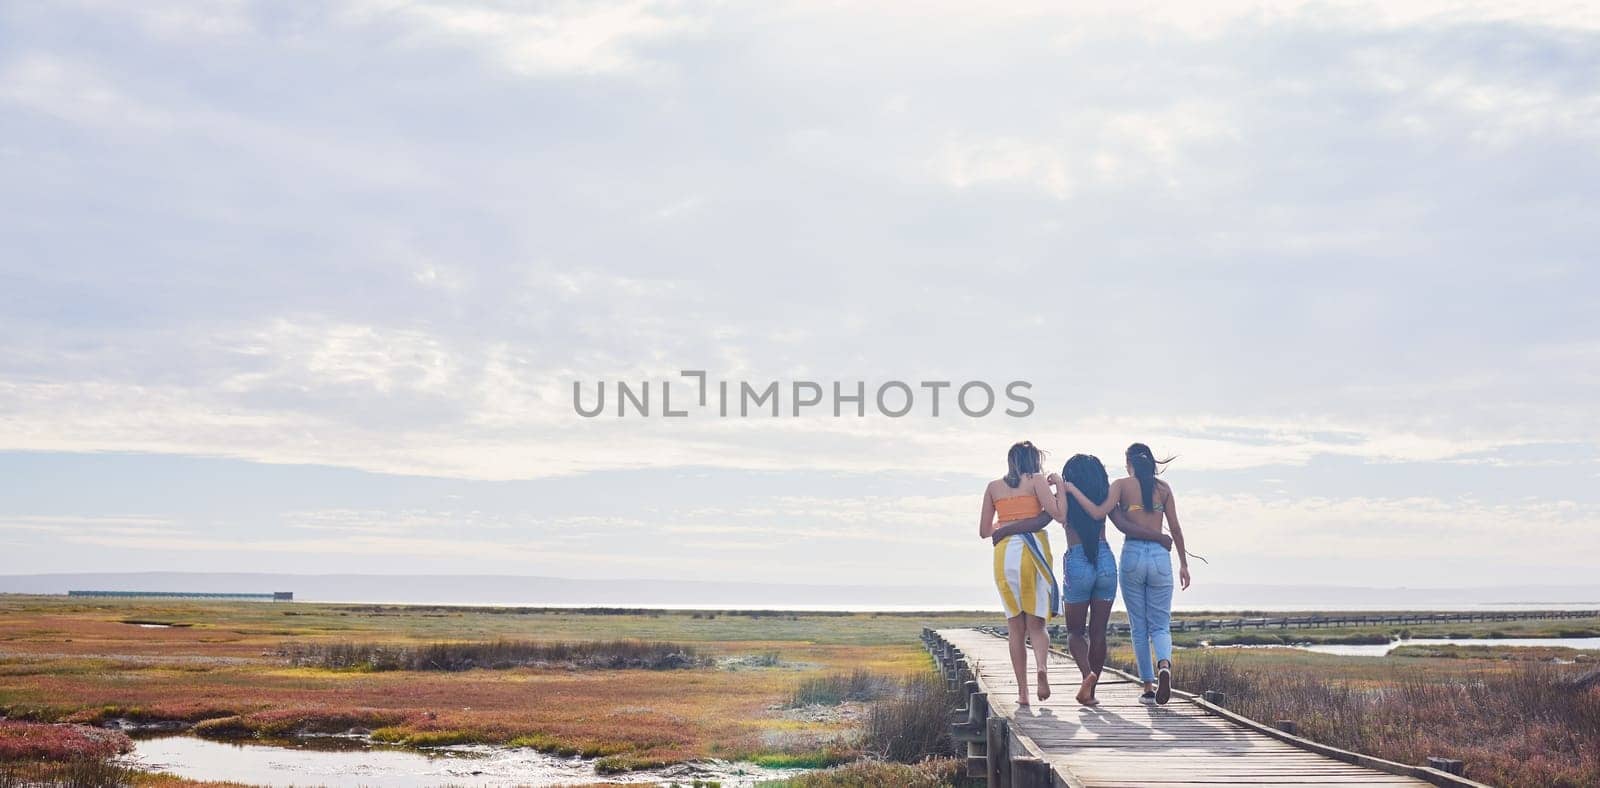 Relax, happy and boardwalk with friends at beach for travel vacation, support or summer break with sky mockup. Diversity, holiday and nature with women walking together for bonding, hug or peace.